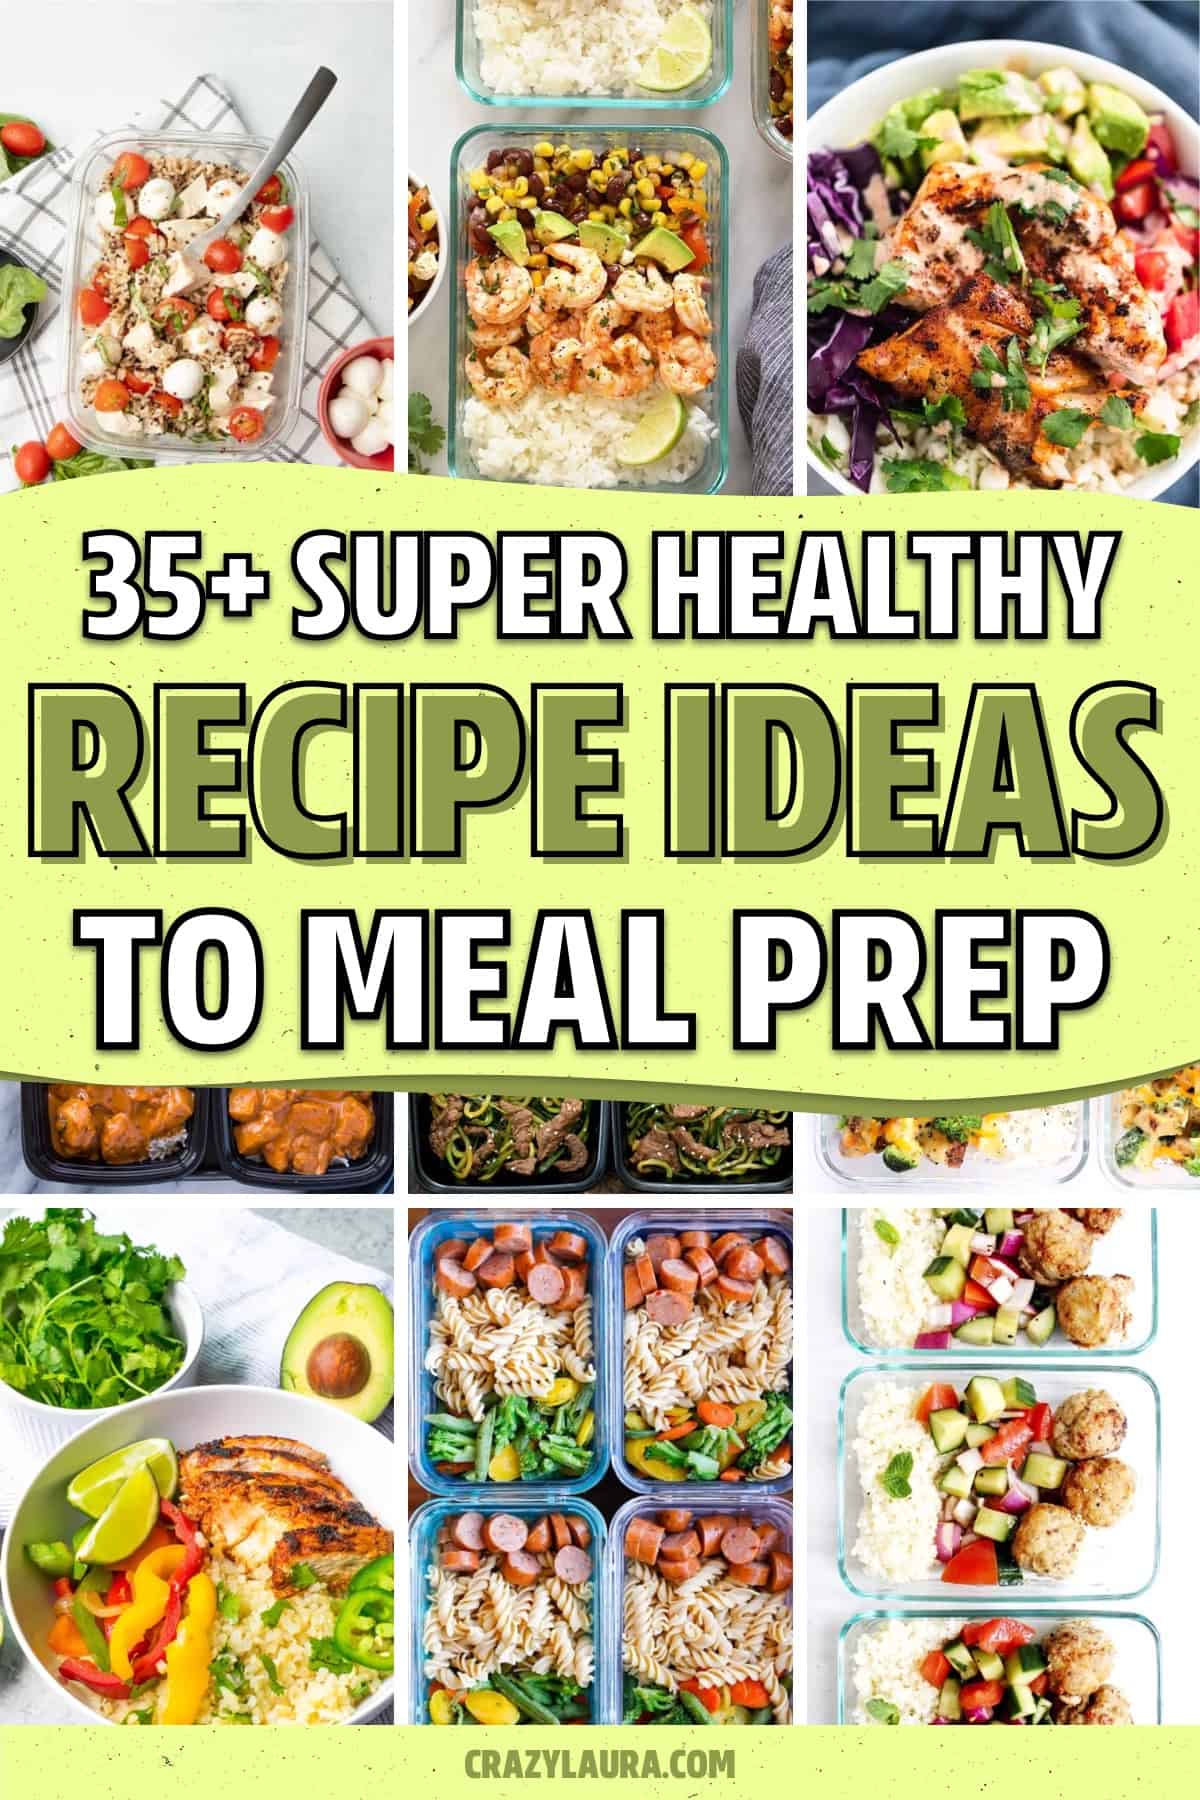 lunch recipe tutorials for meal prepping